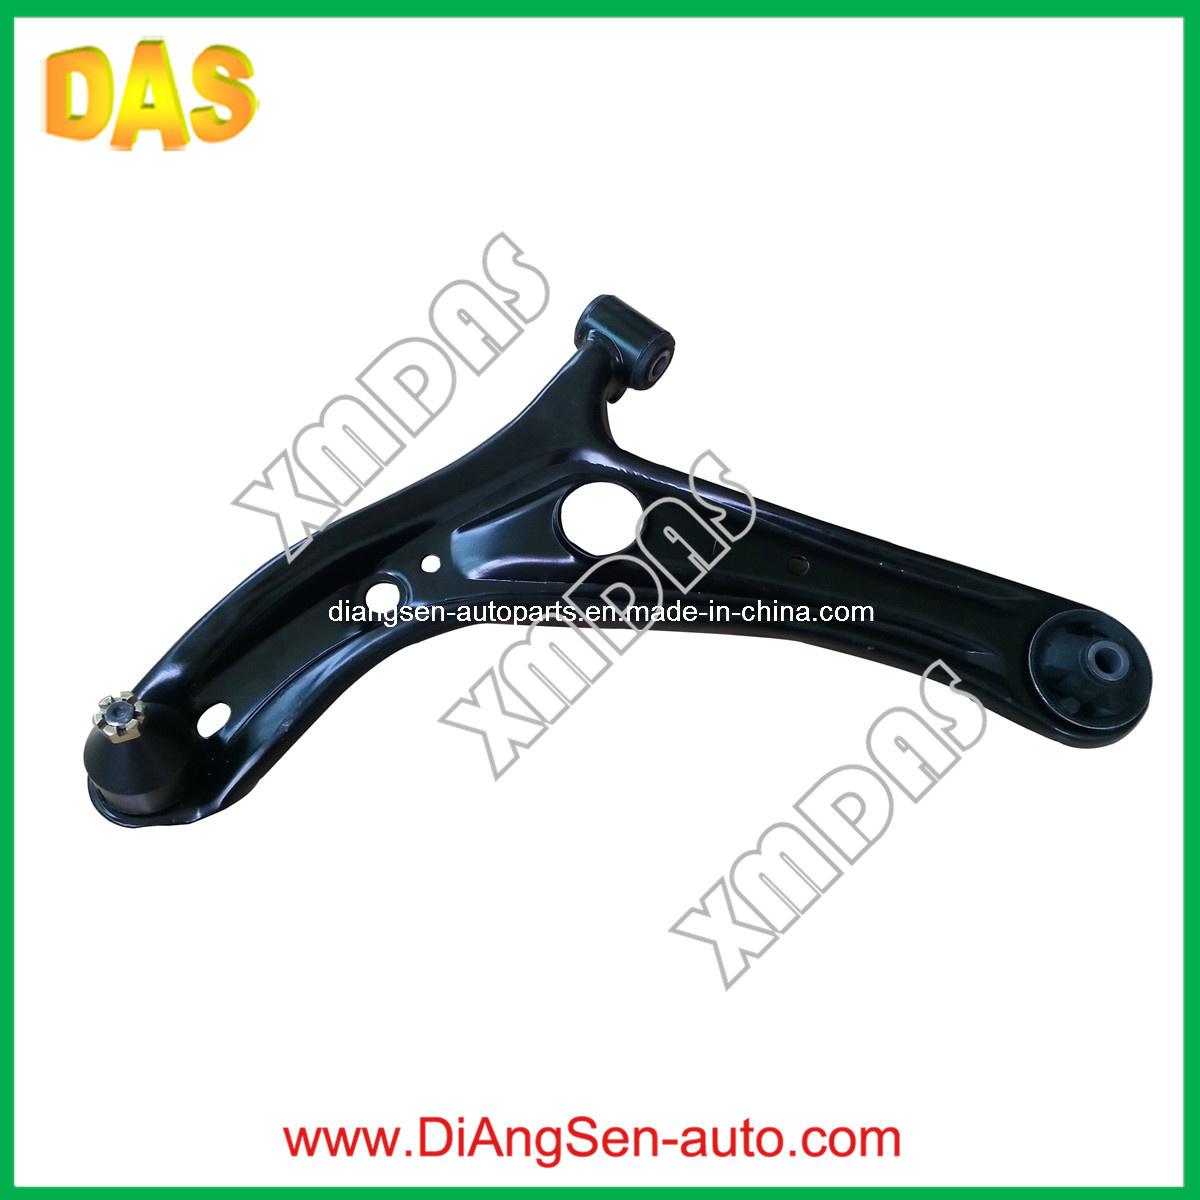 Wholesale Lower Suspension Control Arm for Toyota Yaris 48068-59035rh/48069-59035